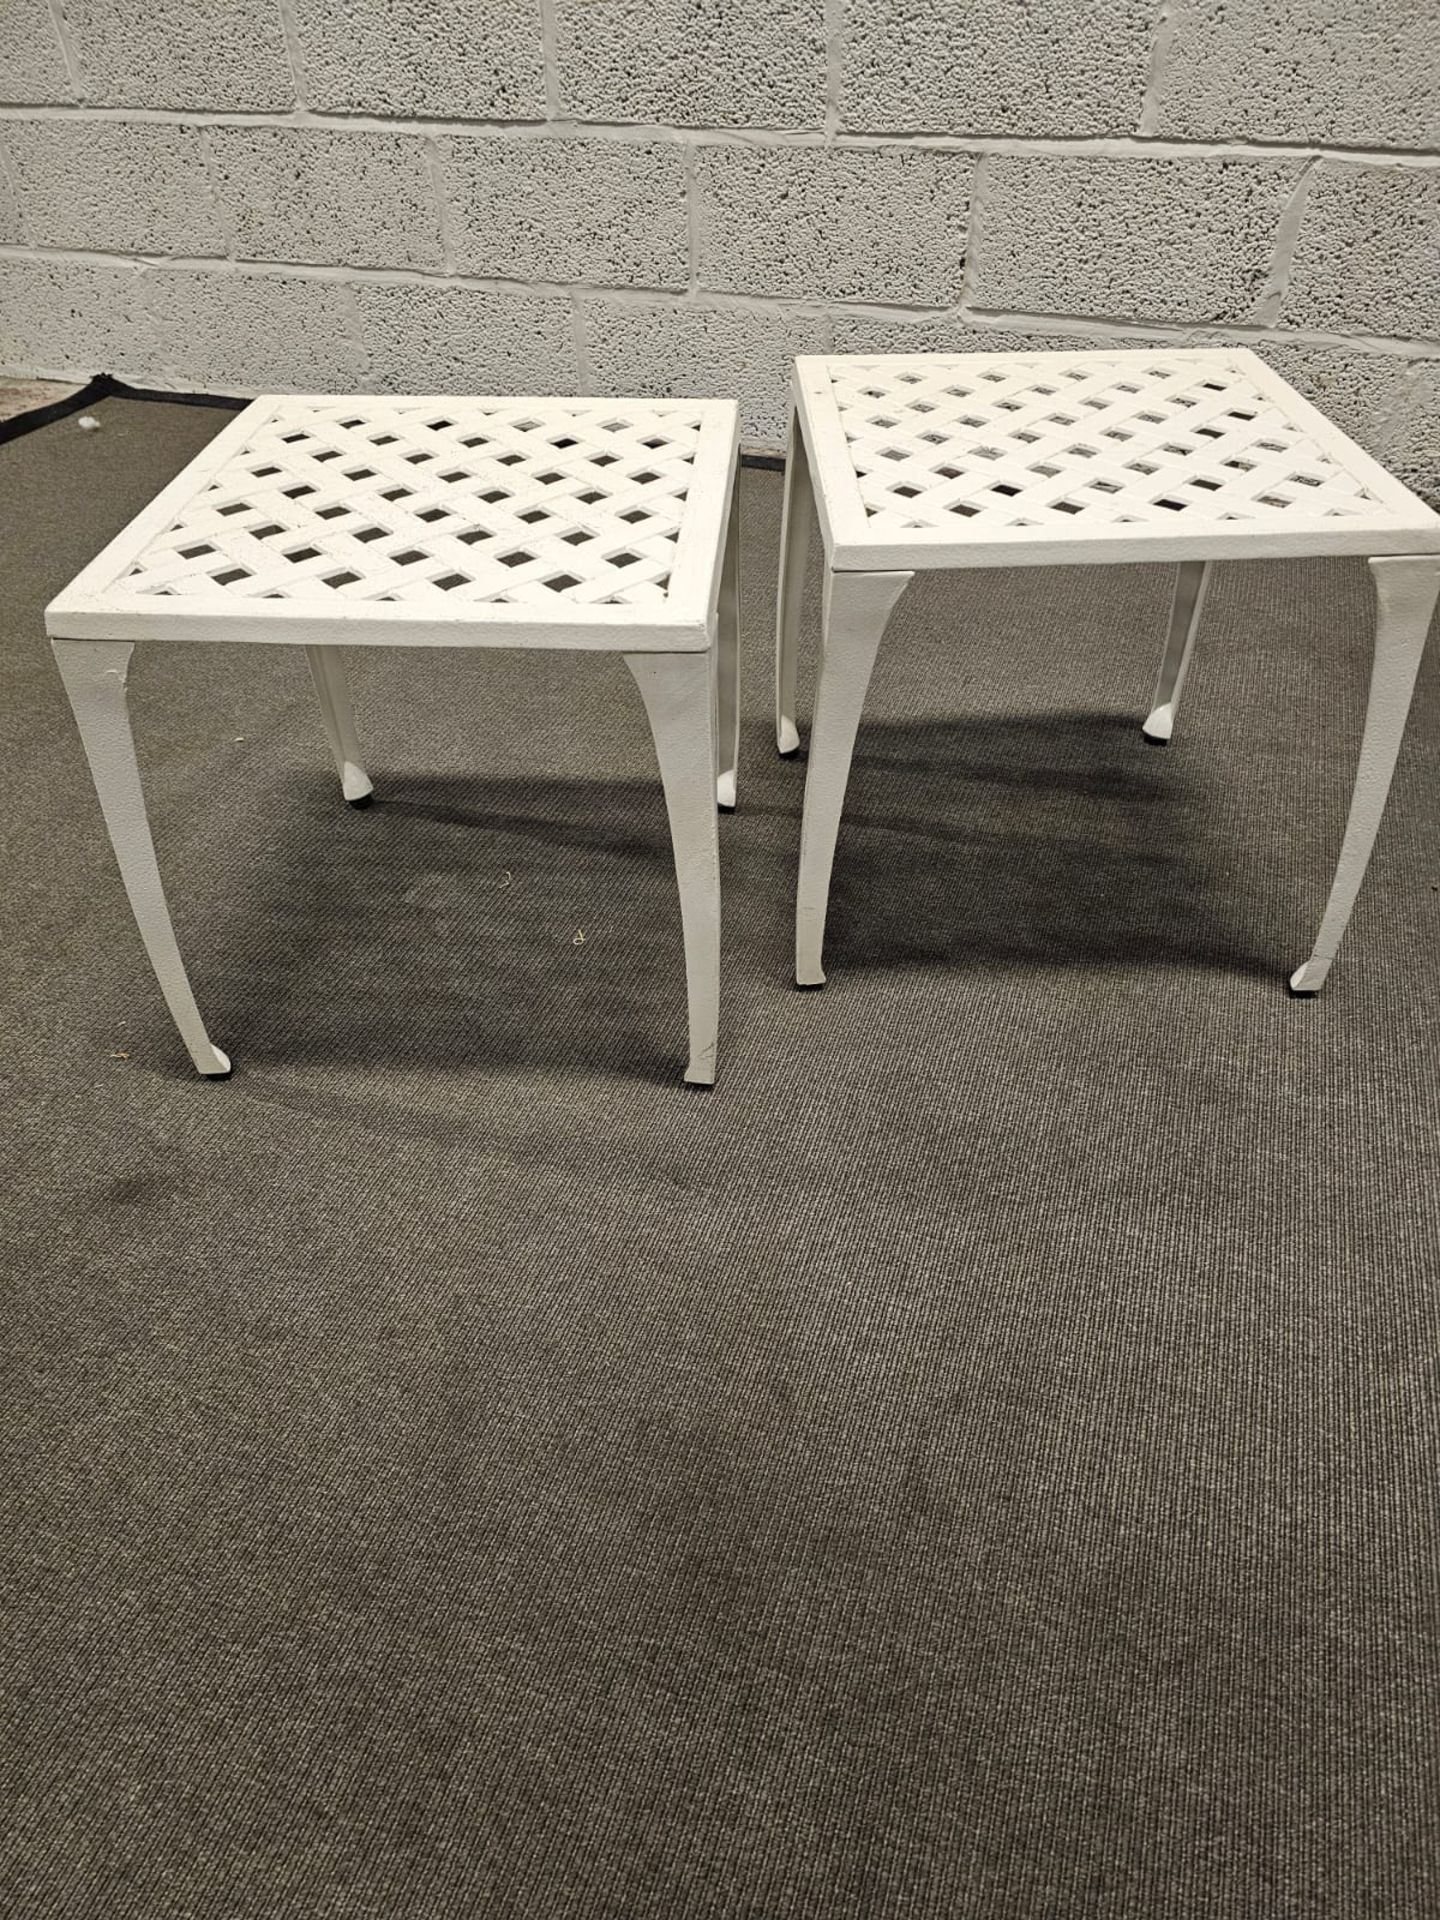 A Pair Of White Metal Painted Side Tables 44 x 44 x 44 Cm - Image 2 of 2